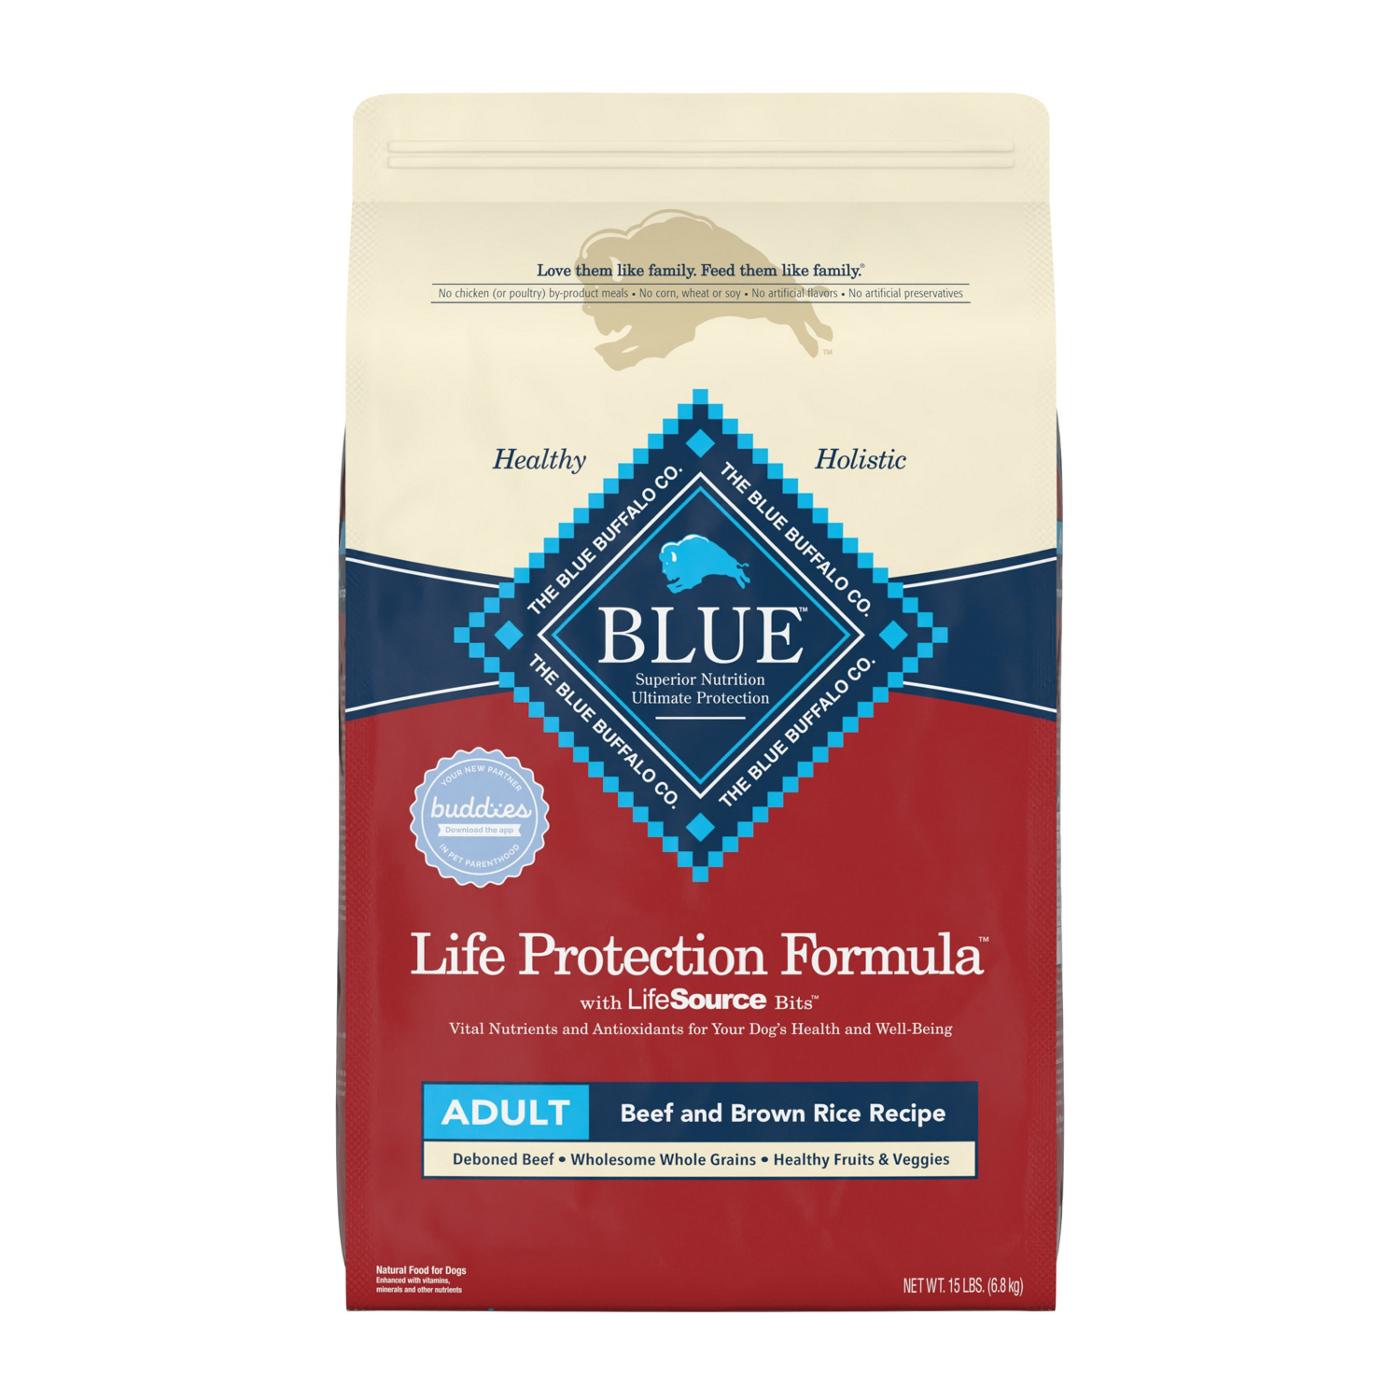 Blue Buffalo Life Protection Formula Beef and Brown Rice Recipe Adult Dry Dog Food; image 1 of 2